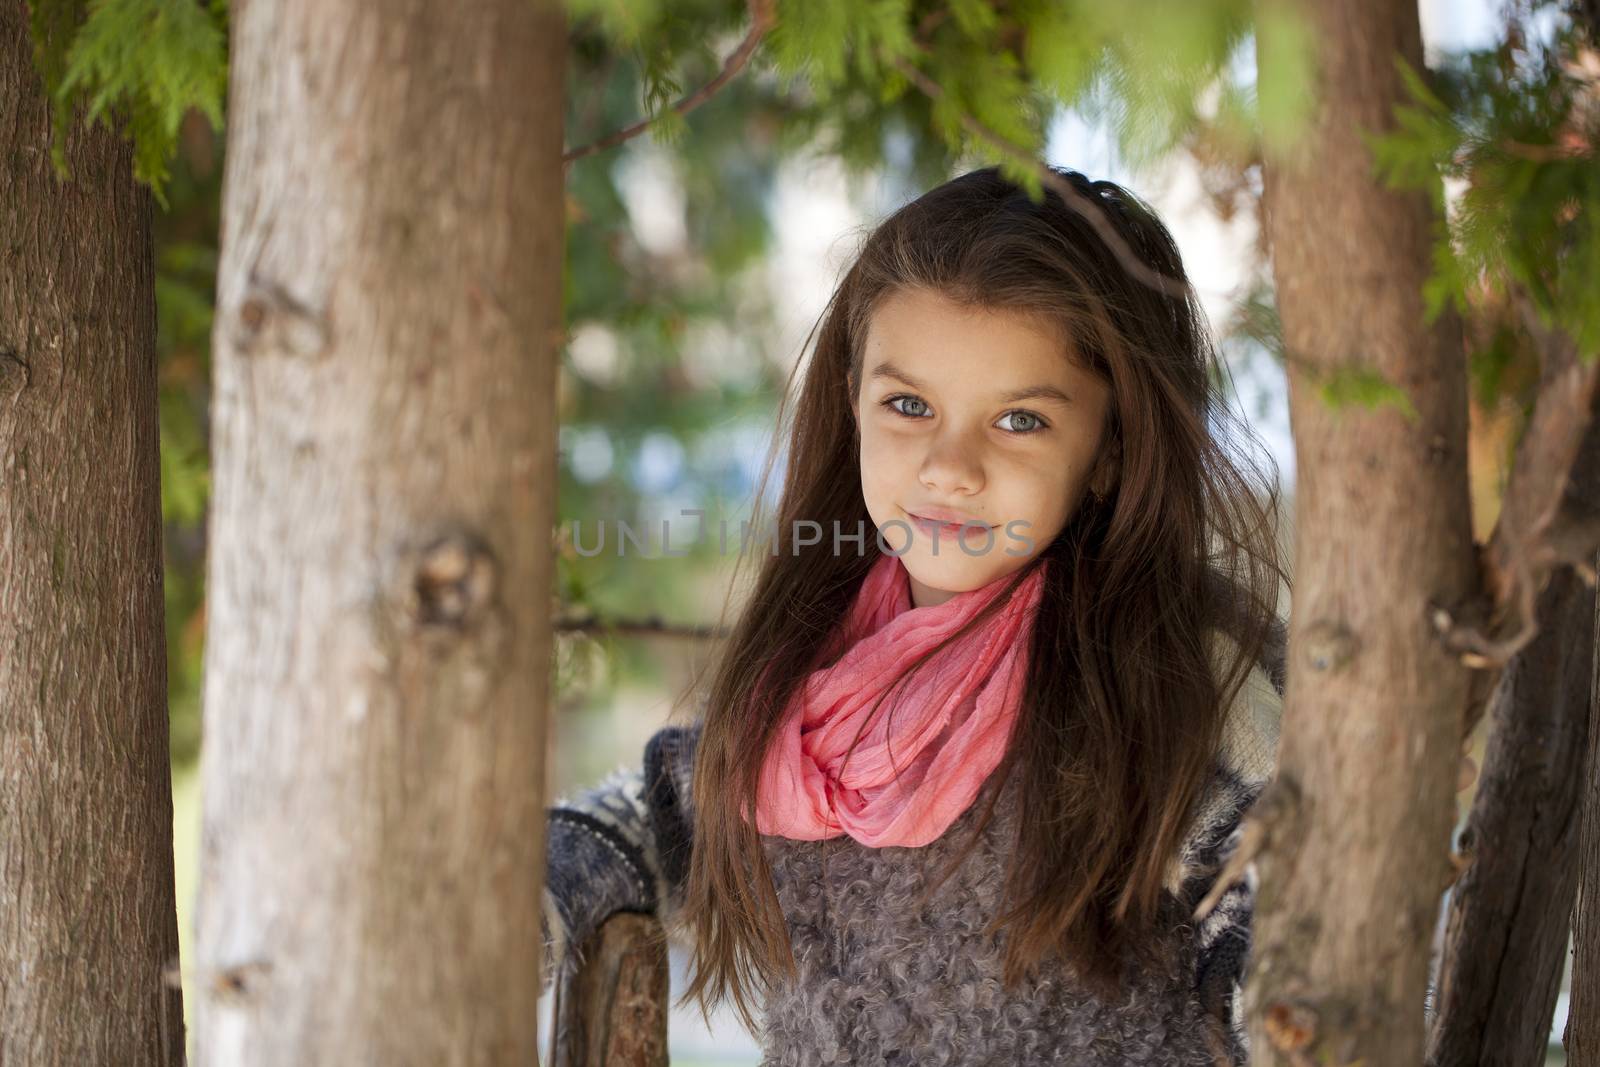 Beautifal little girl in the autumn park by andersonrise